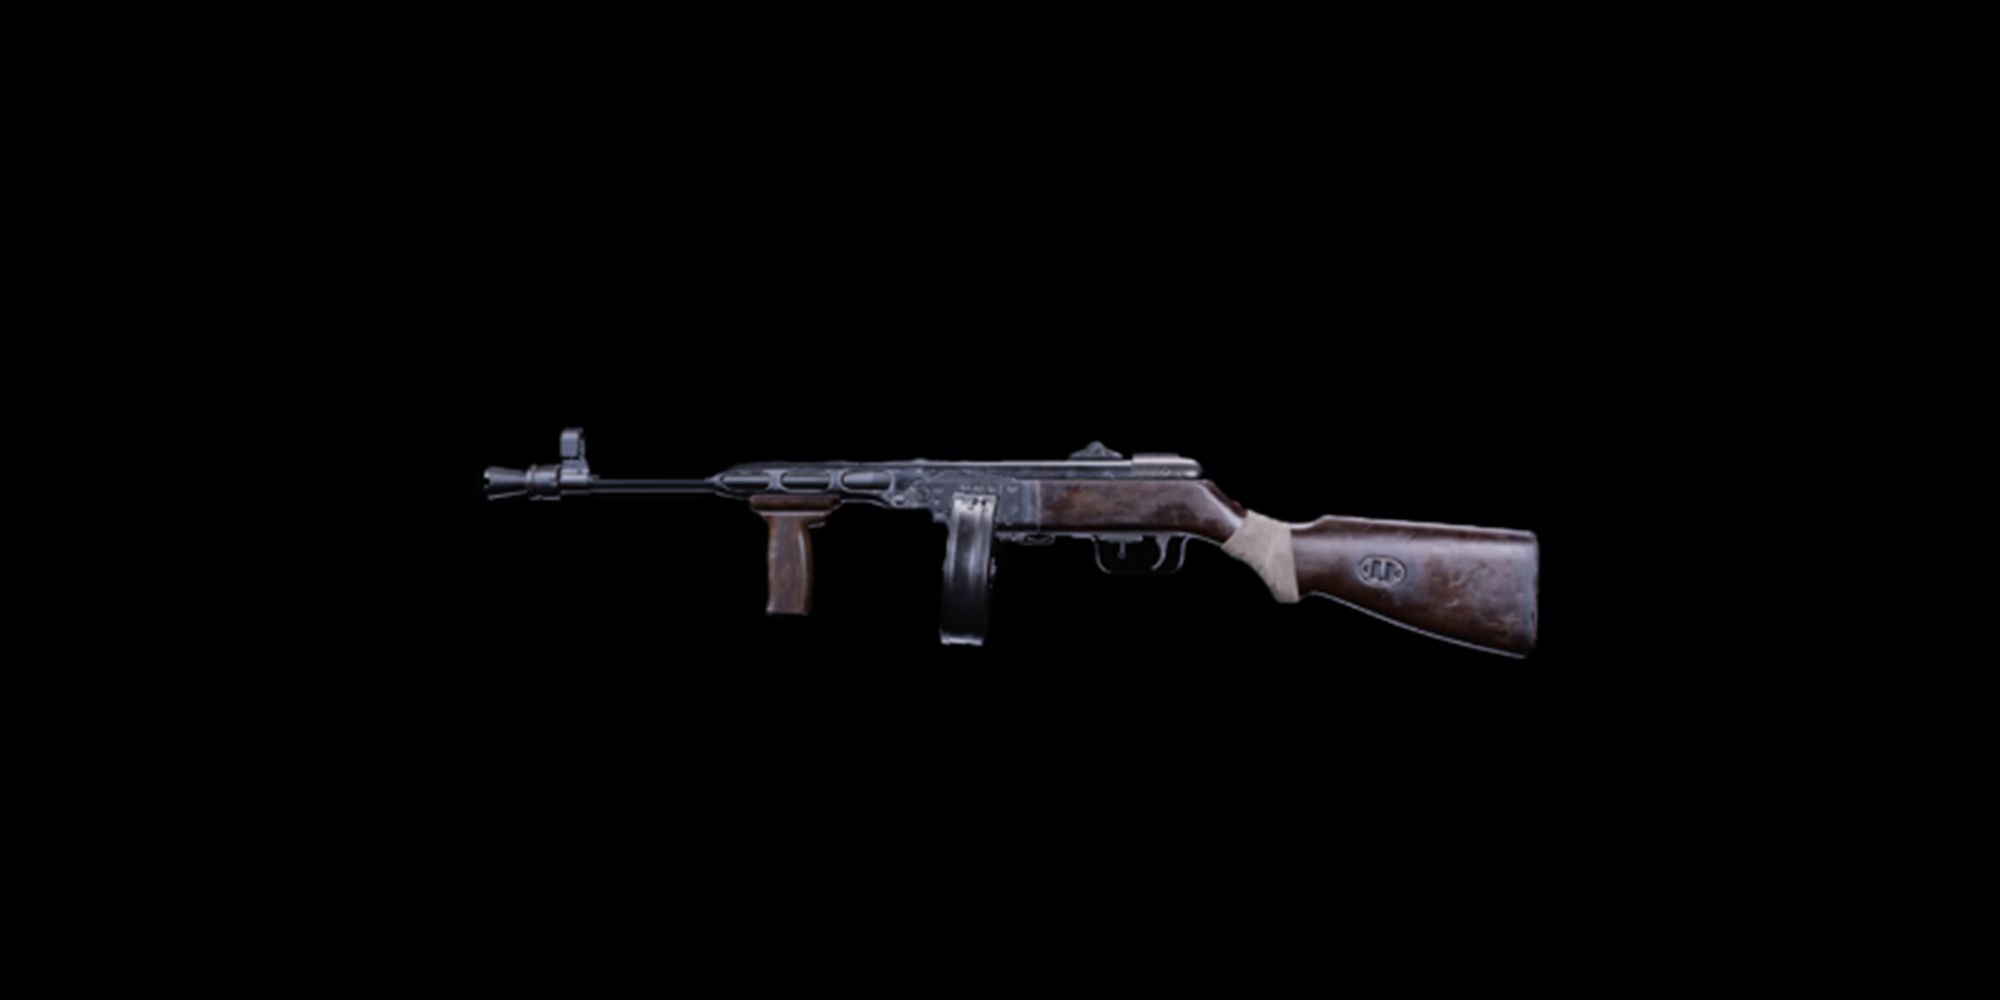 Warzone PPSH-41 from Call of Duty against a black background